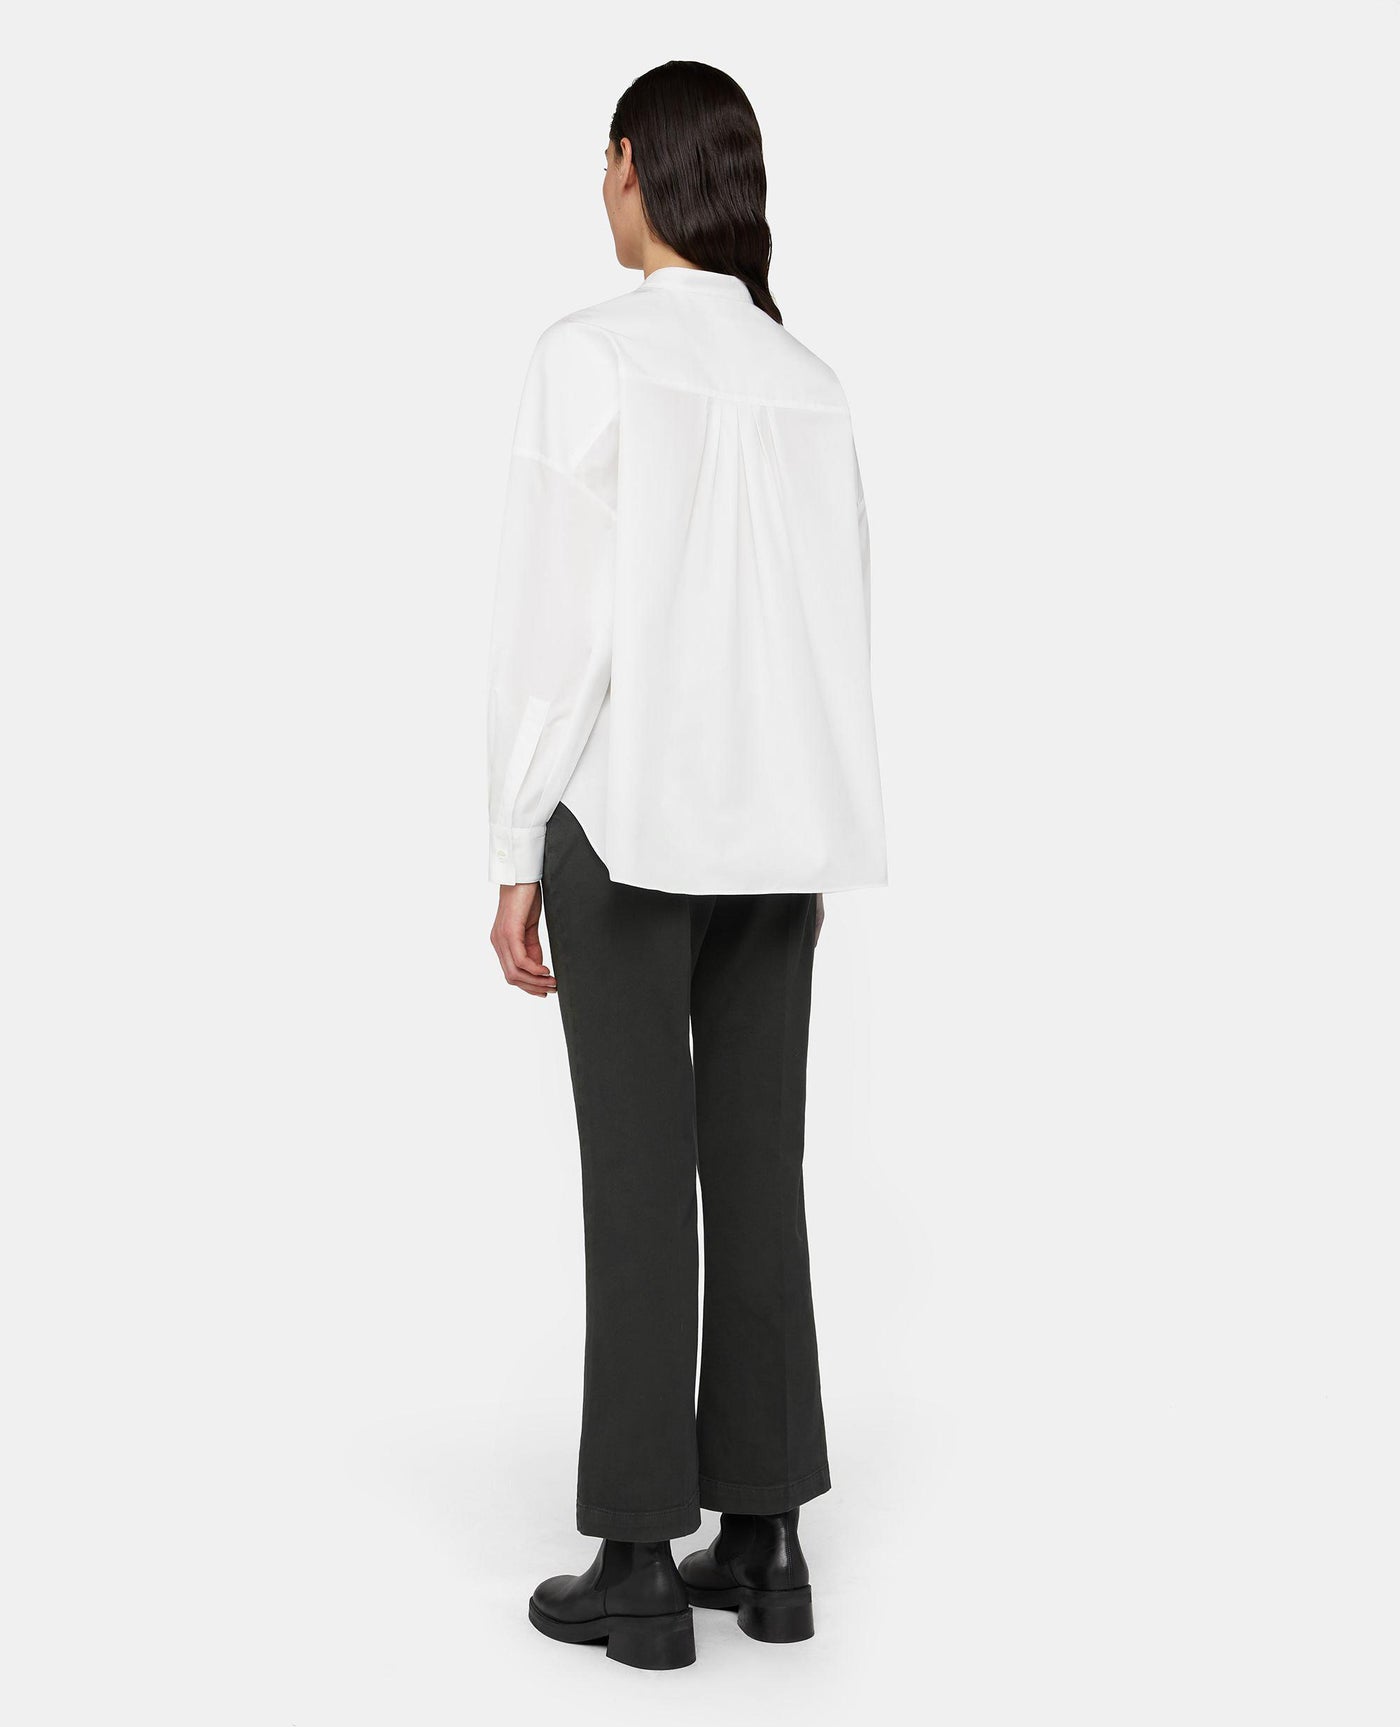 Women's trousers with pleat